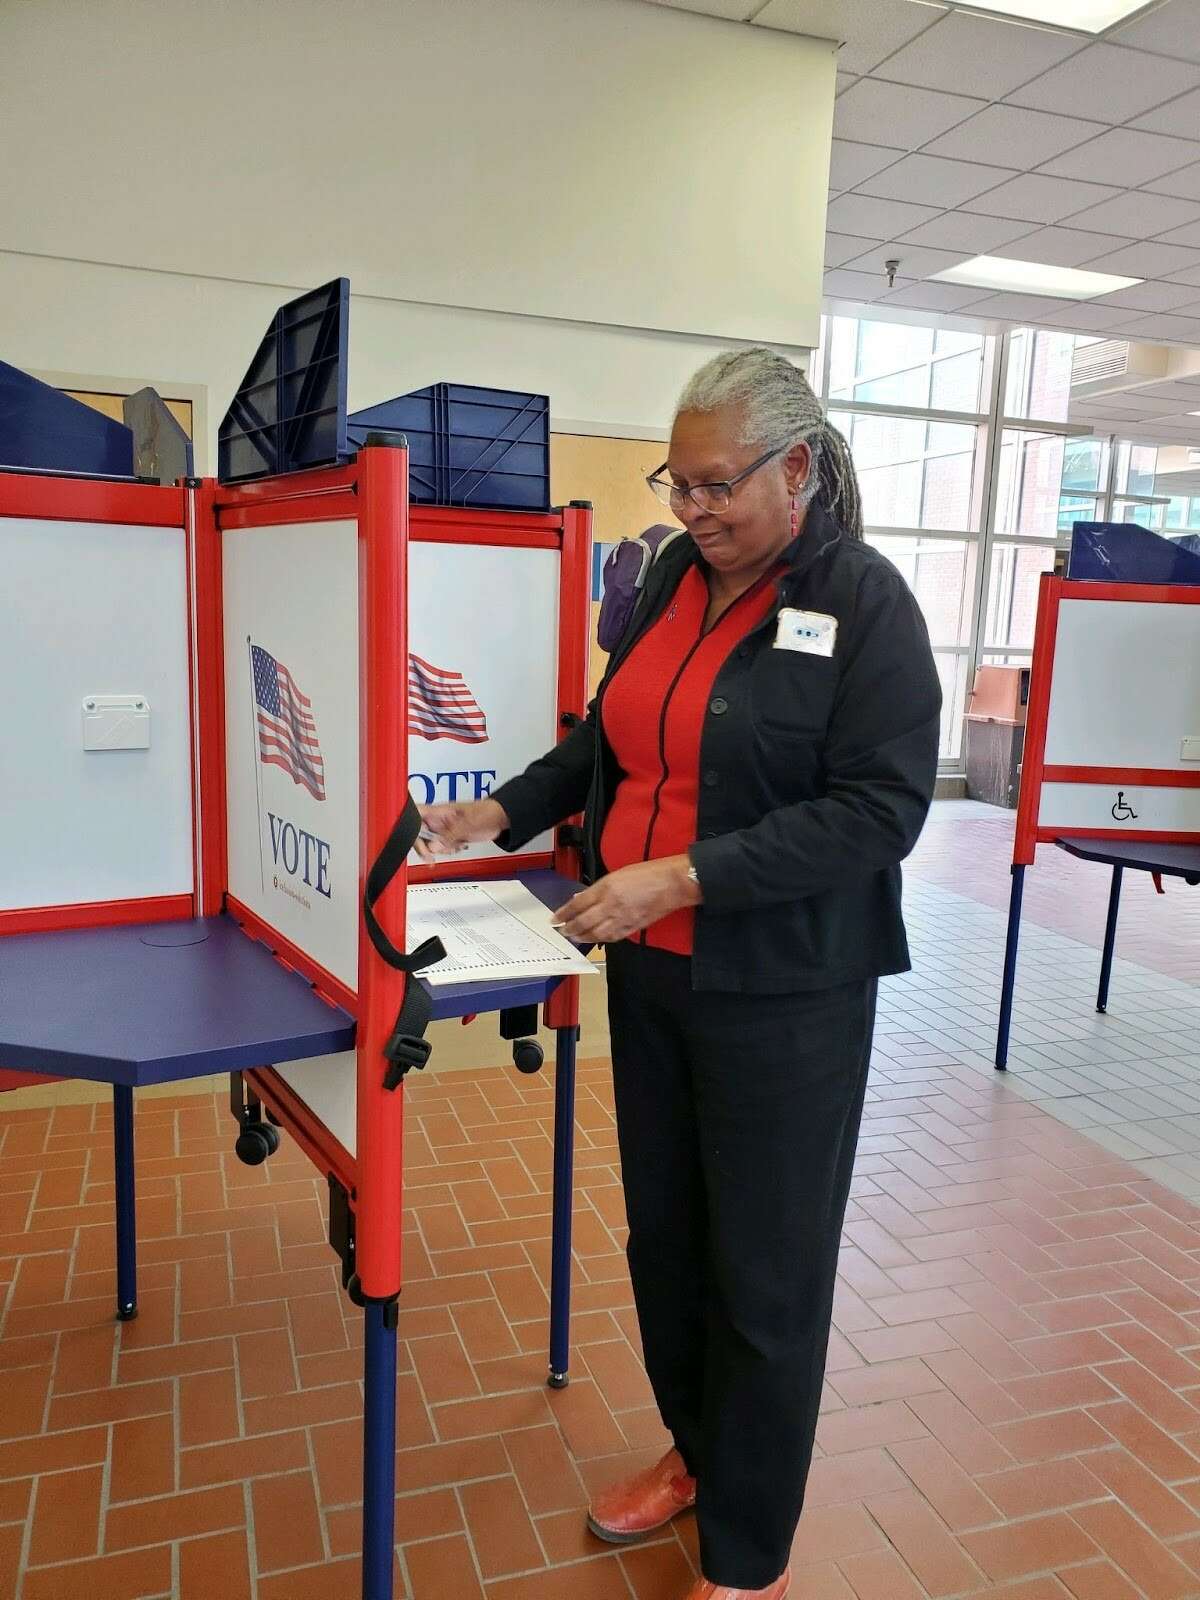 Gwen Wright, the Democratic candidate for Rensselaer County executive, votes at the Troy Atrium in Troy, N.Y. on Oct. 23, 2021, the first day of early voting.